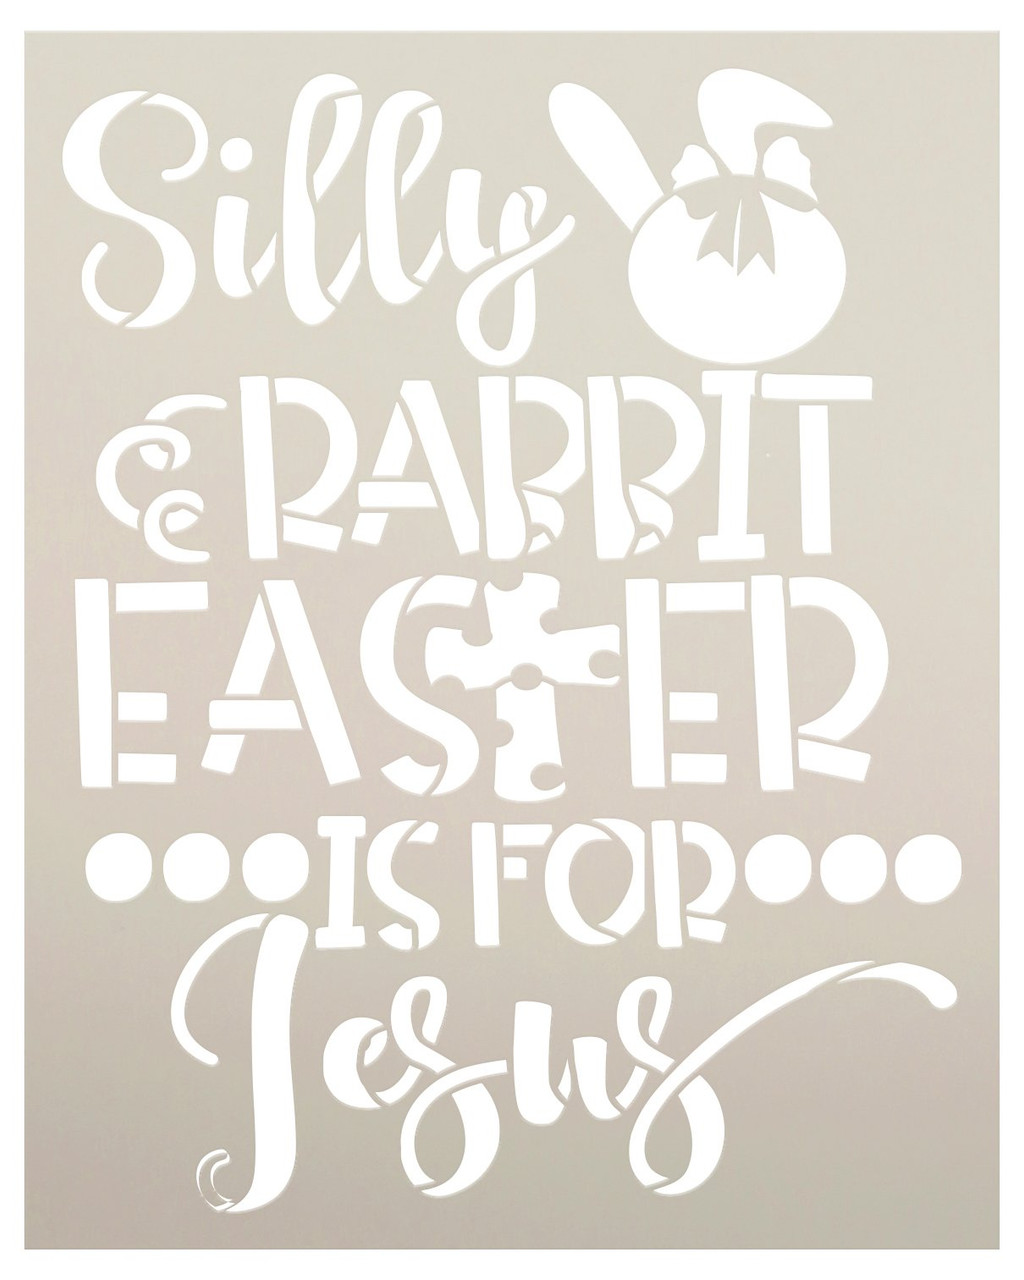 Silly Rabbit Easter is for Jesus Stencil by StudioR12 | DIY Spring Faith Word Art Home Decor | Craft & Paint Wood Sign | Select Size